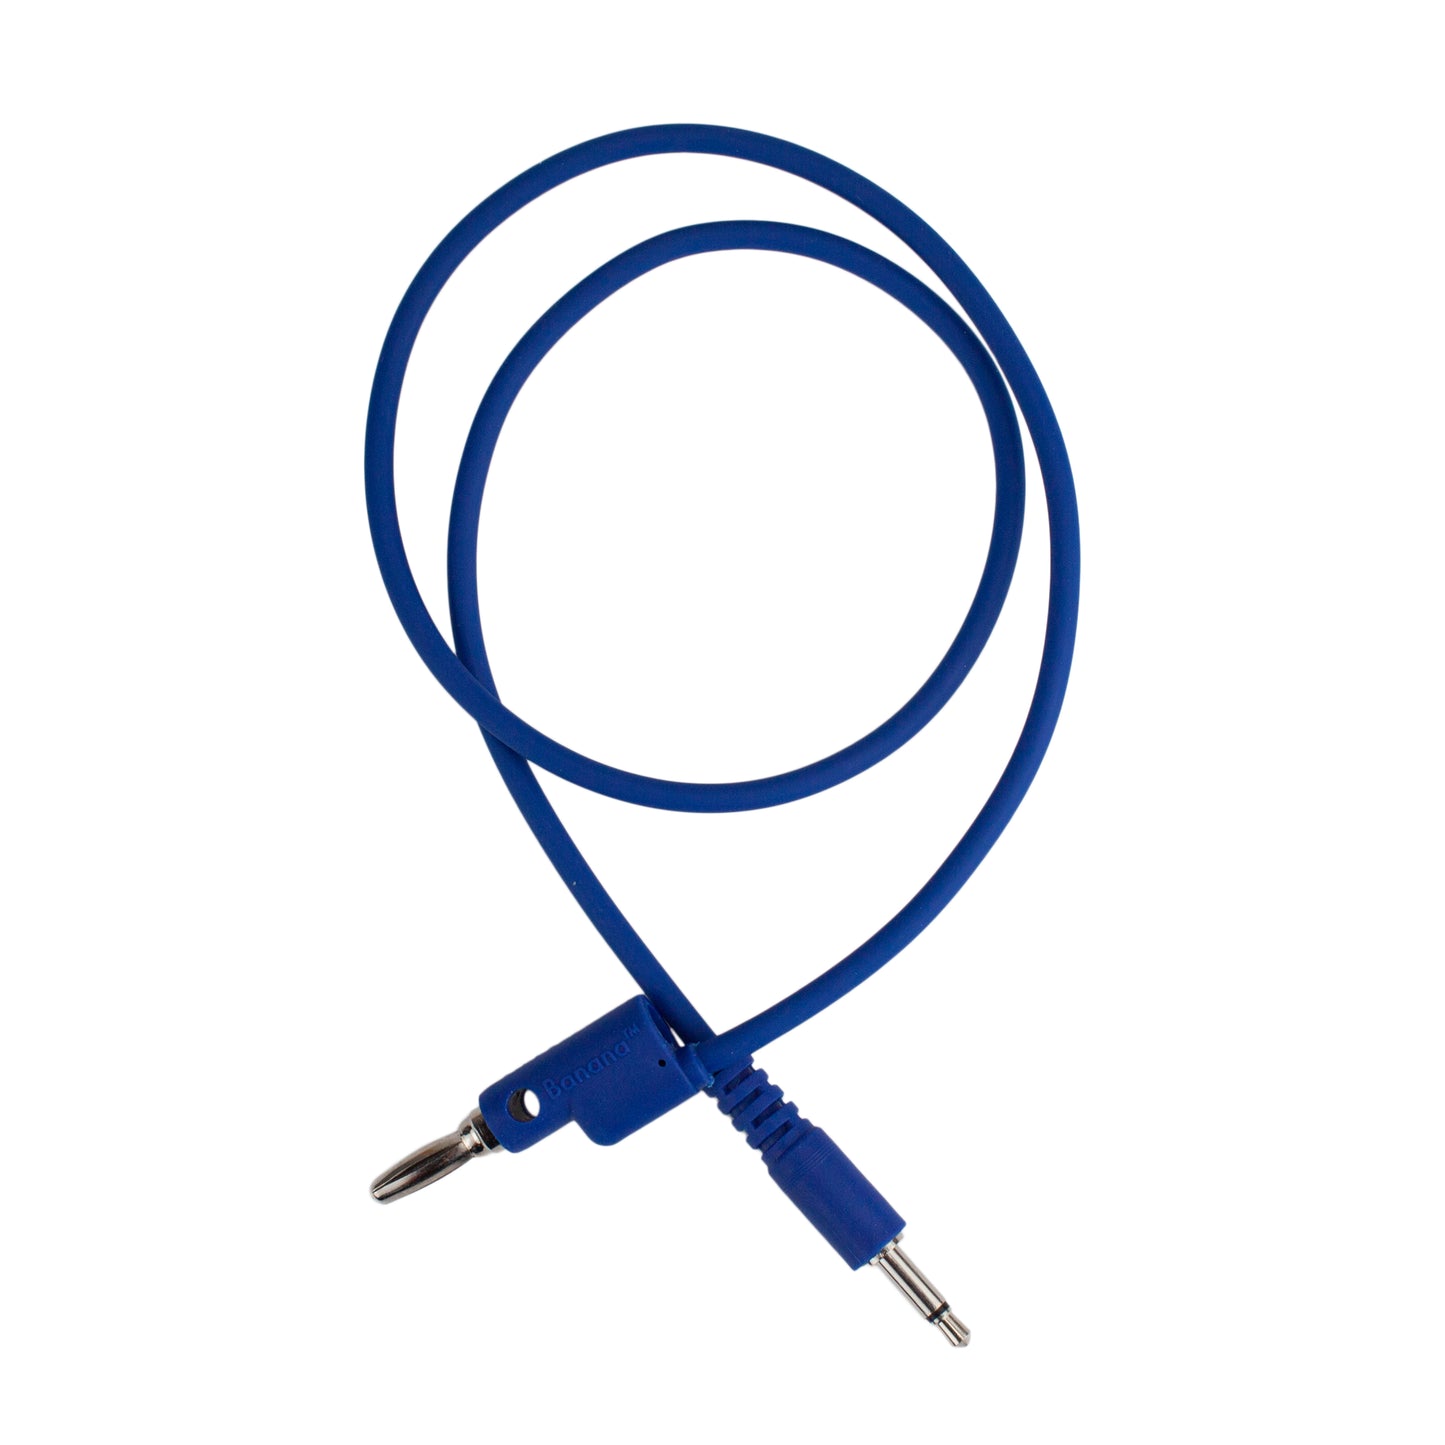 Banana to Eurorack adapter cable 50cm